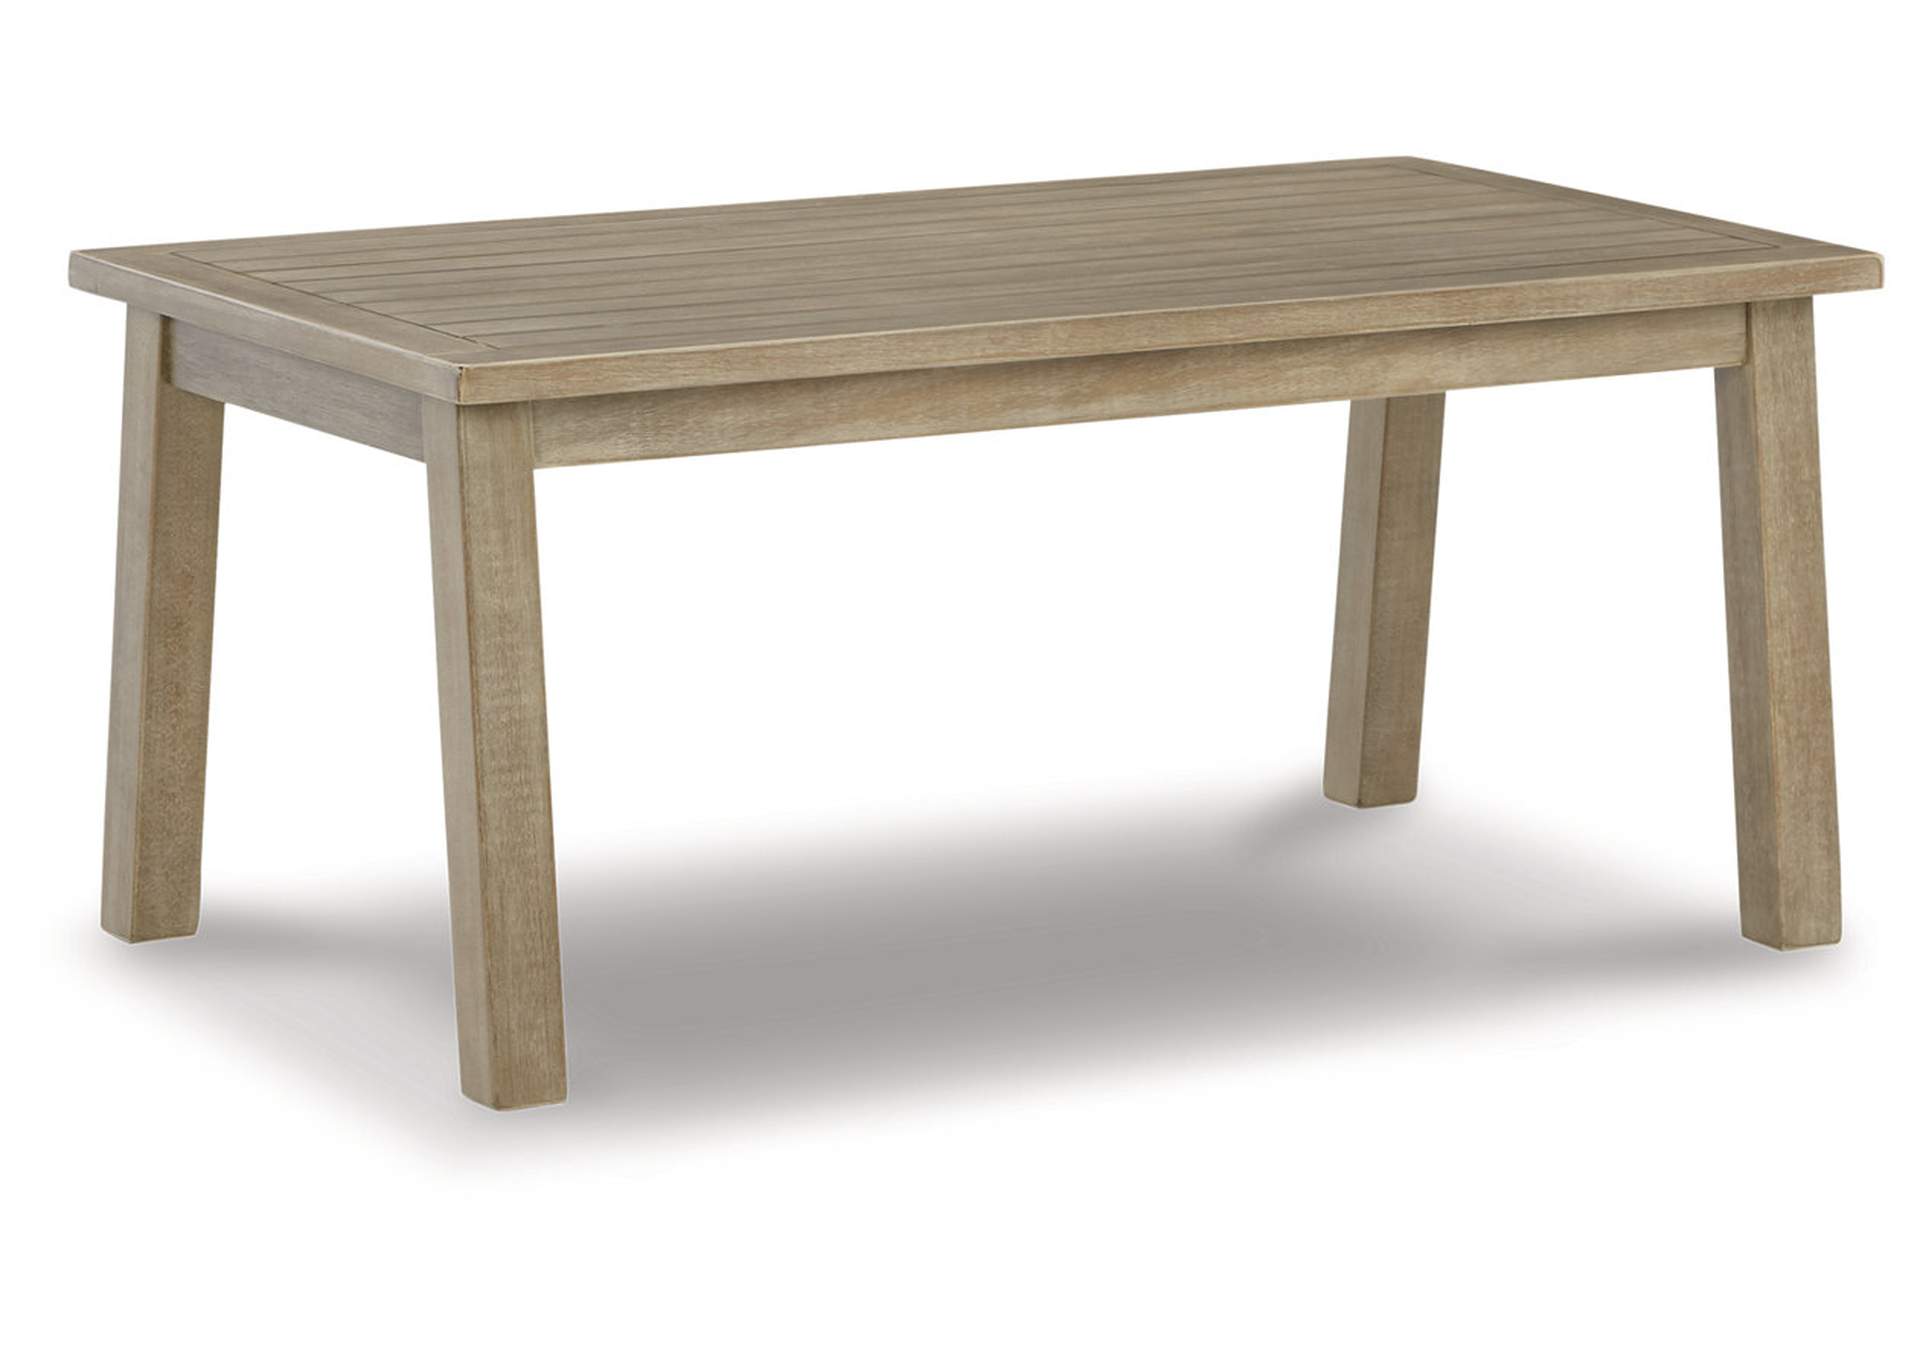 Barn Cove Outdoor Coffee Table,Outdoor By Ashley